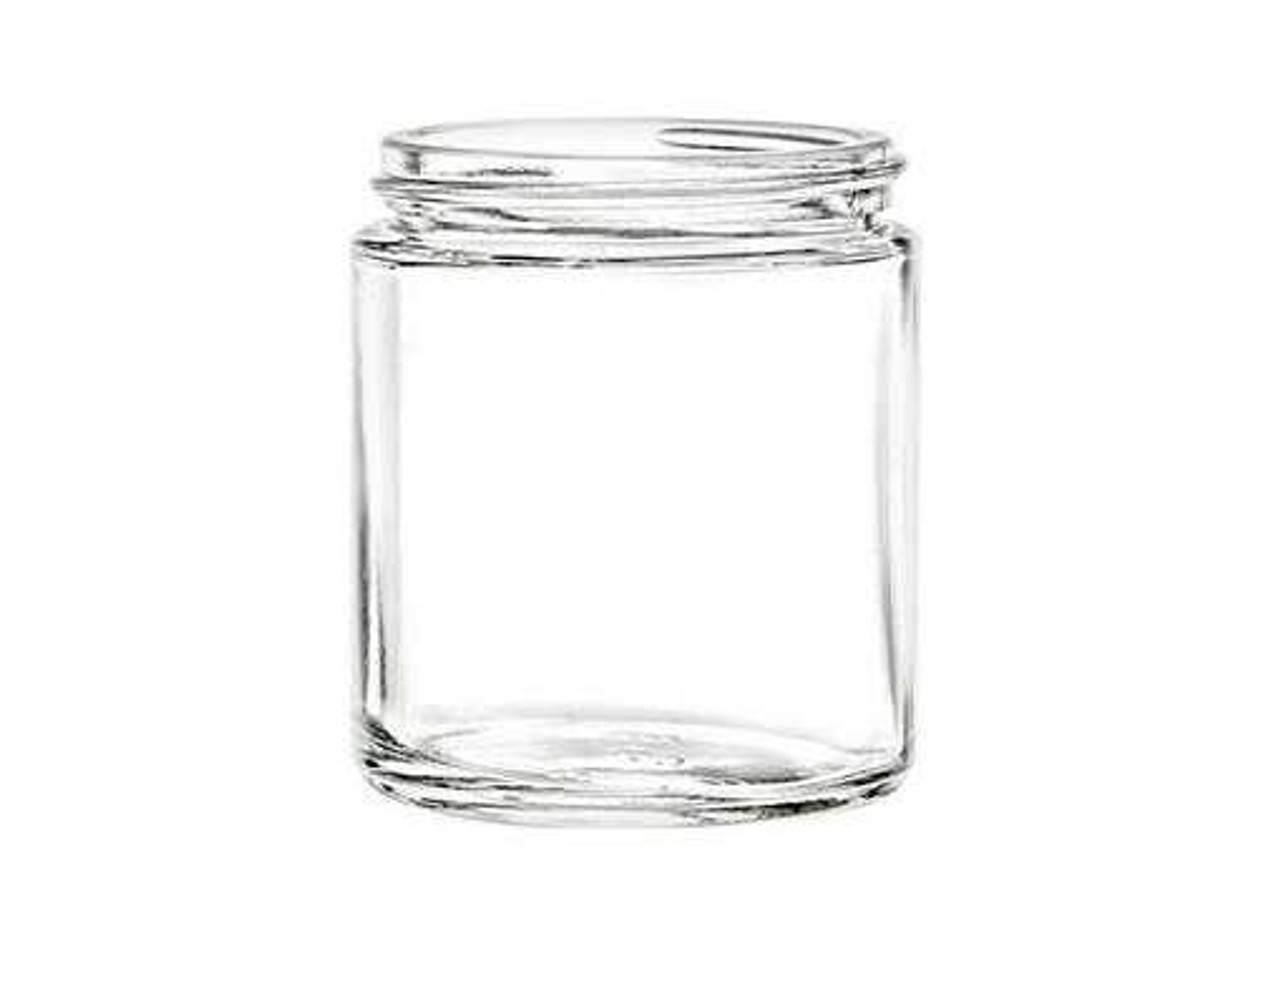 6 Pcs Small Glass Spice Jars with Label,High Sealing Threaded